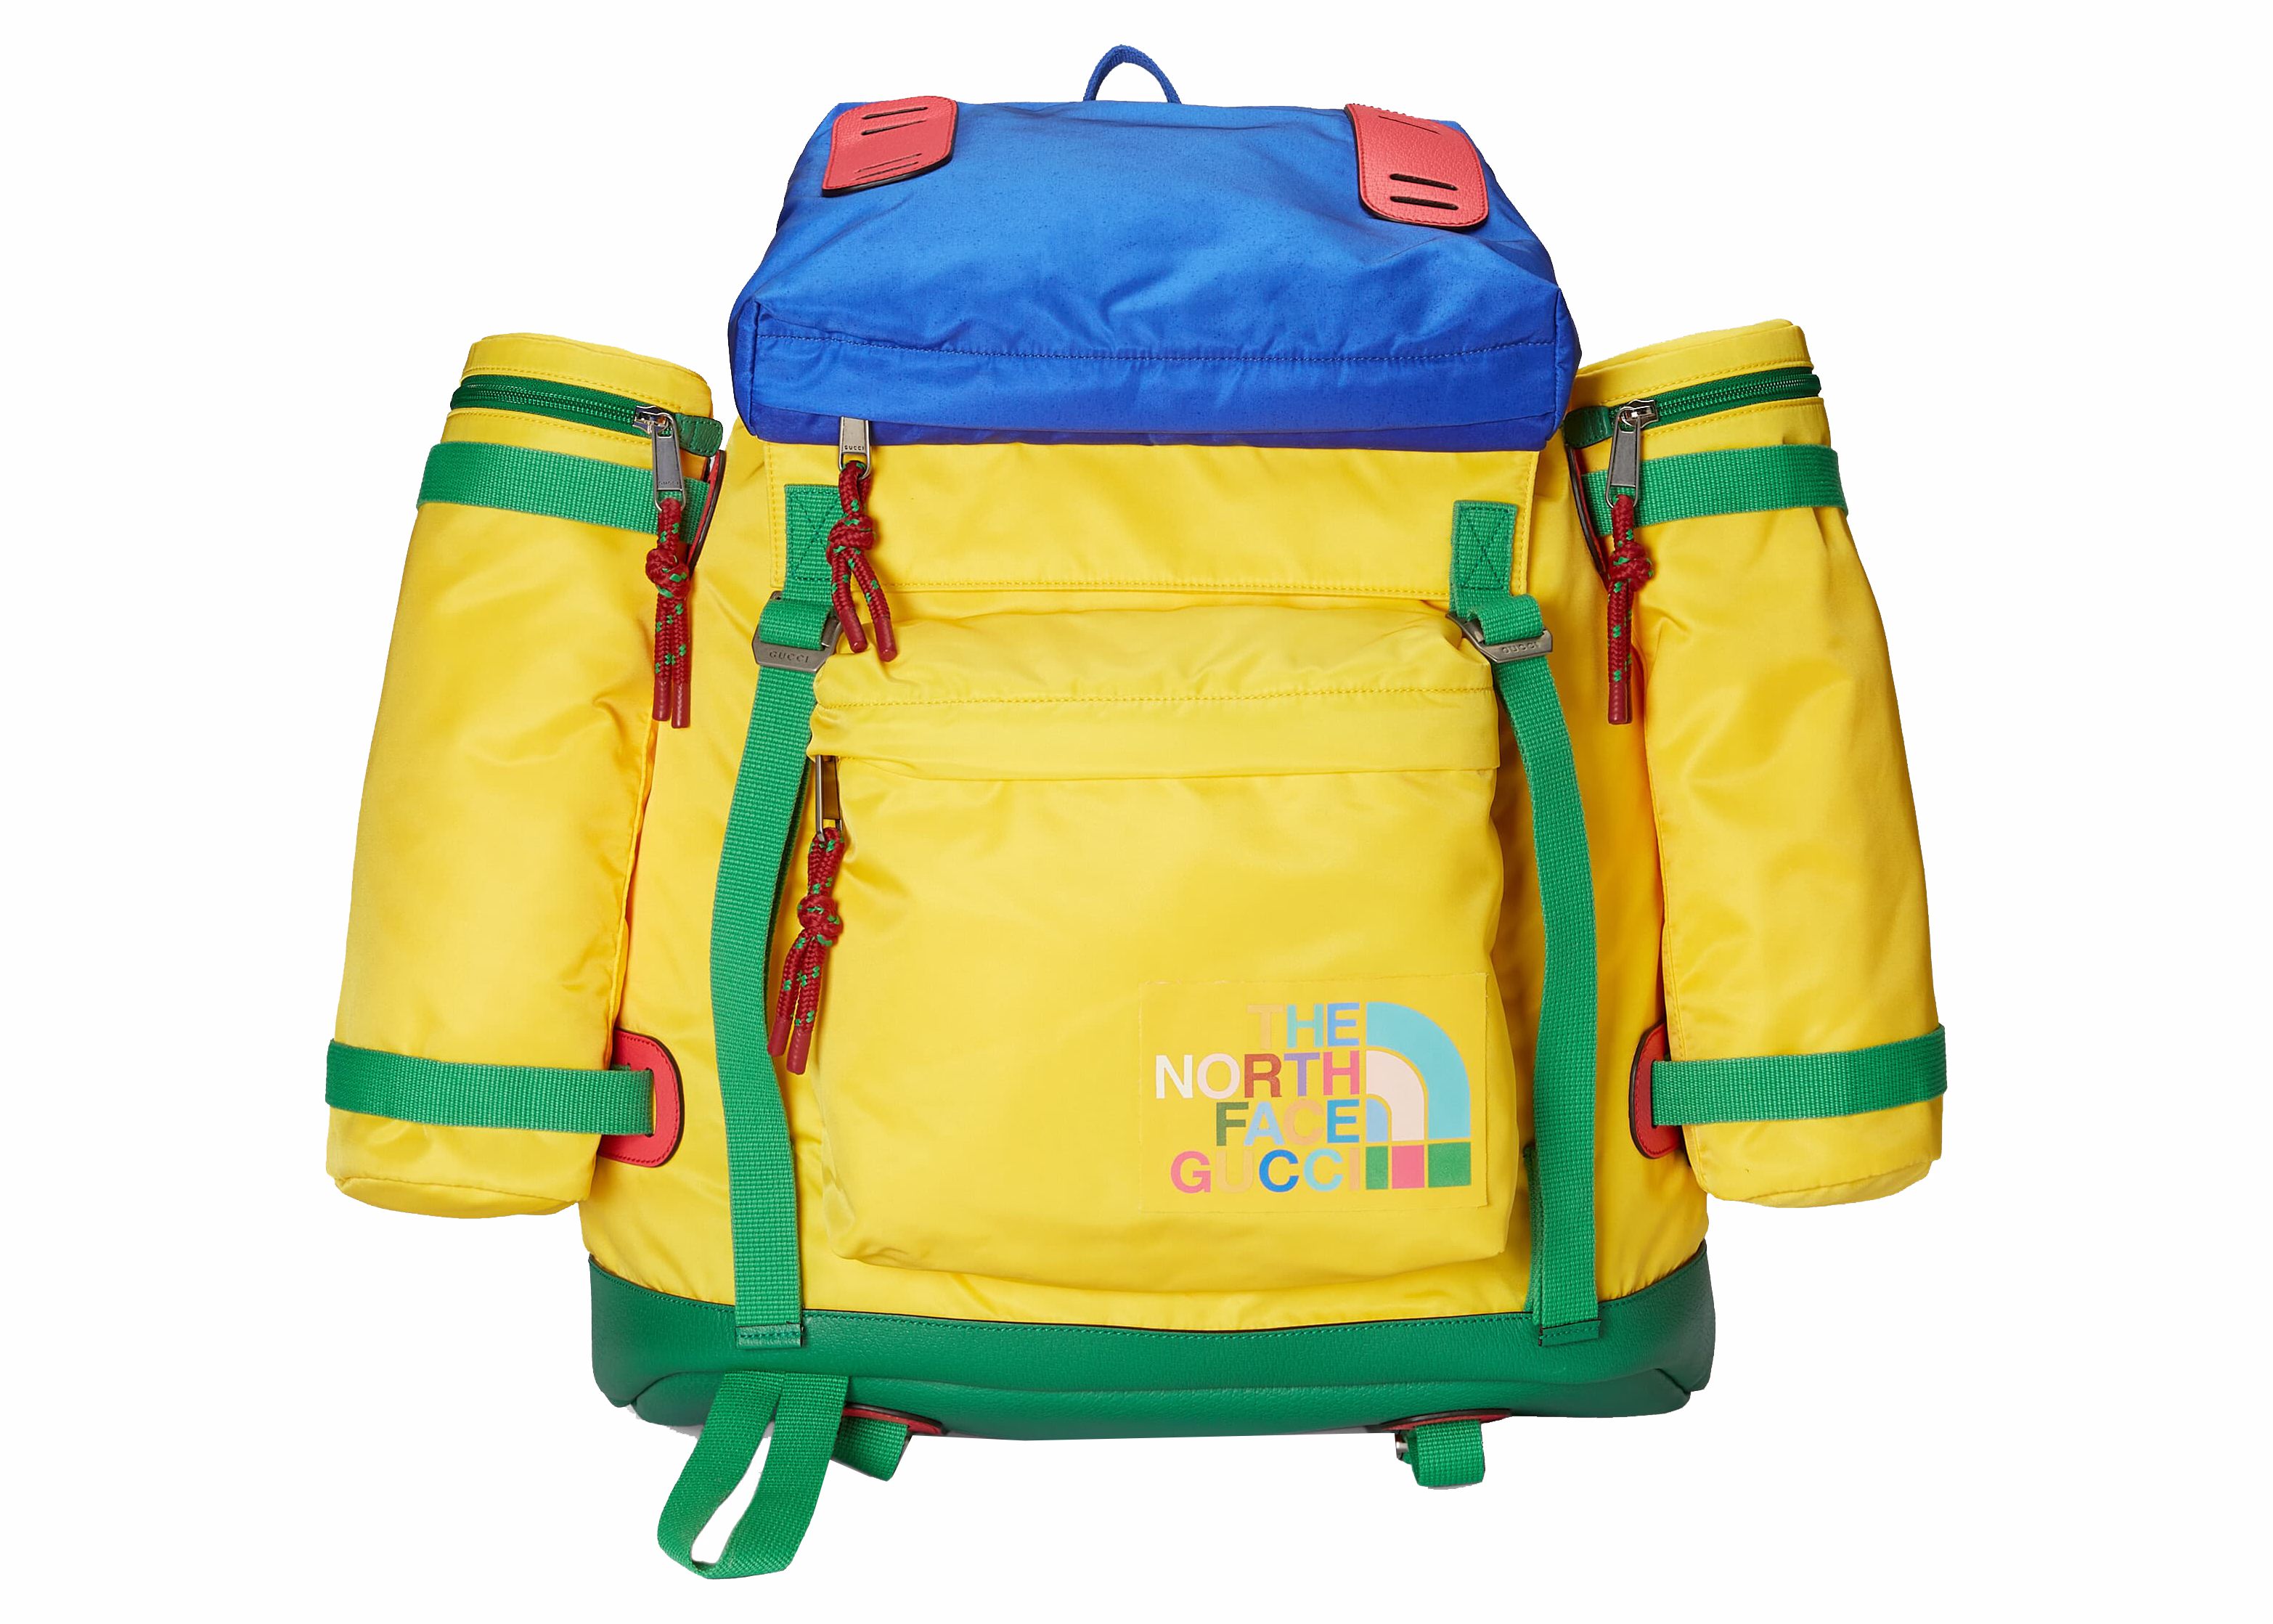 Gucci x The North Face Gucci Backpack Yellow/Blue in Recycled 